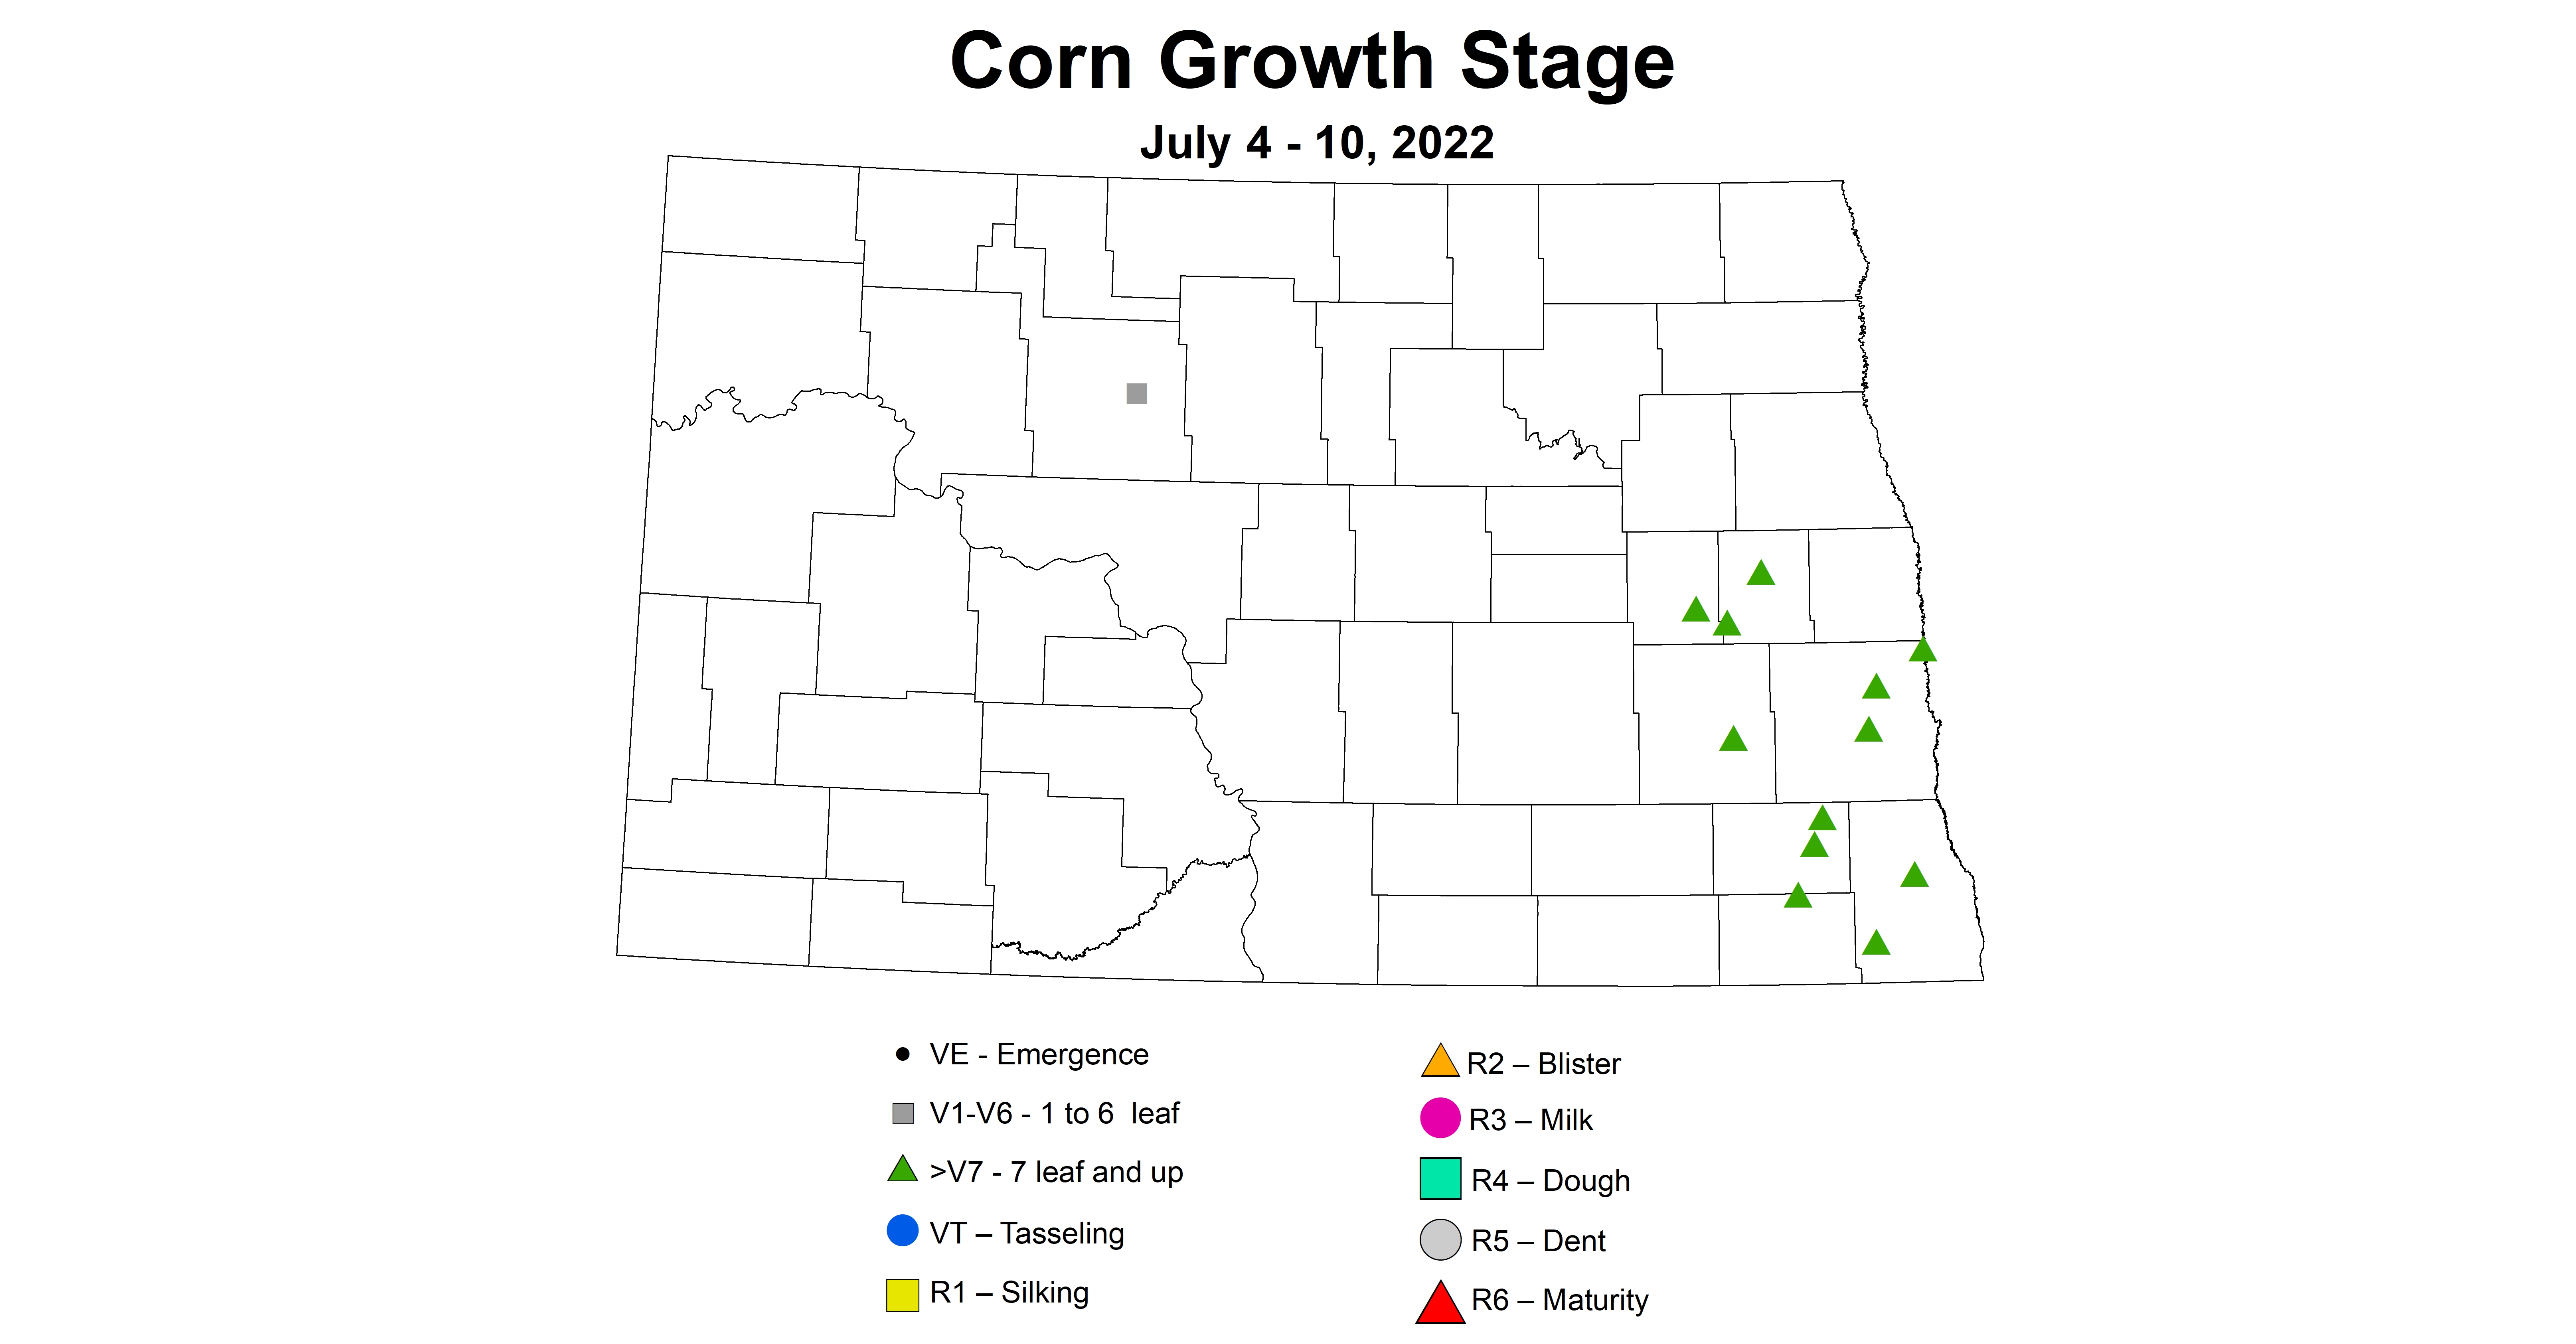 ND IPM map of corn growth stages July 4-10, 2022